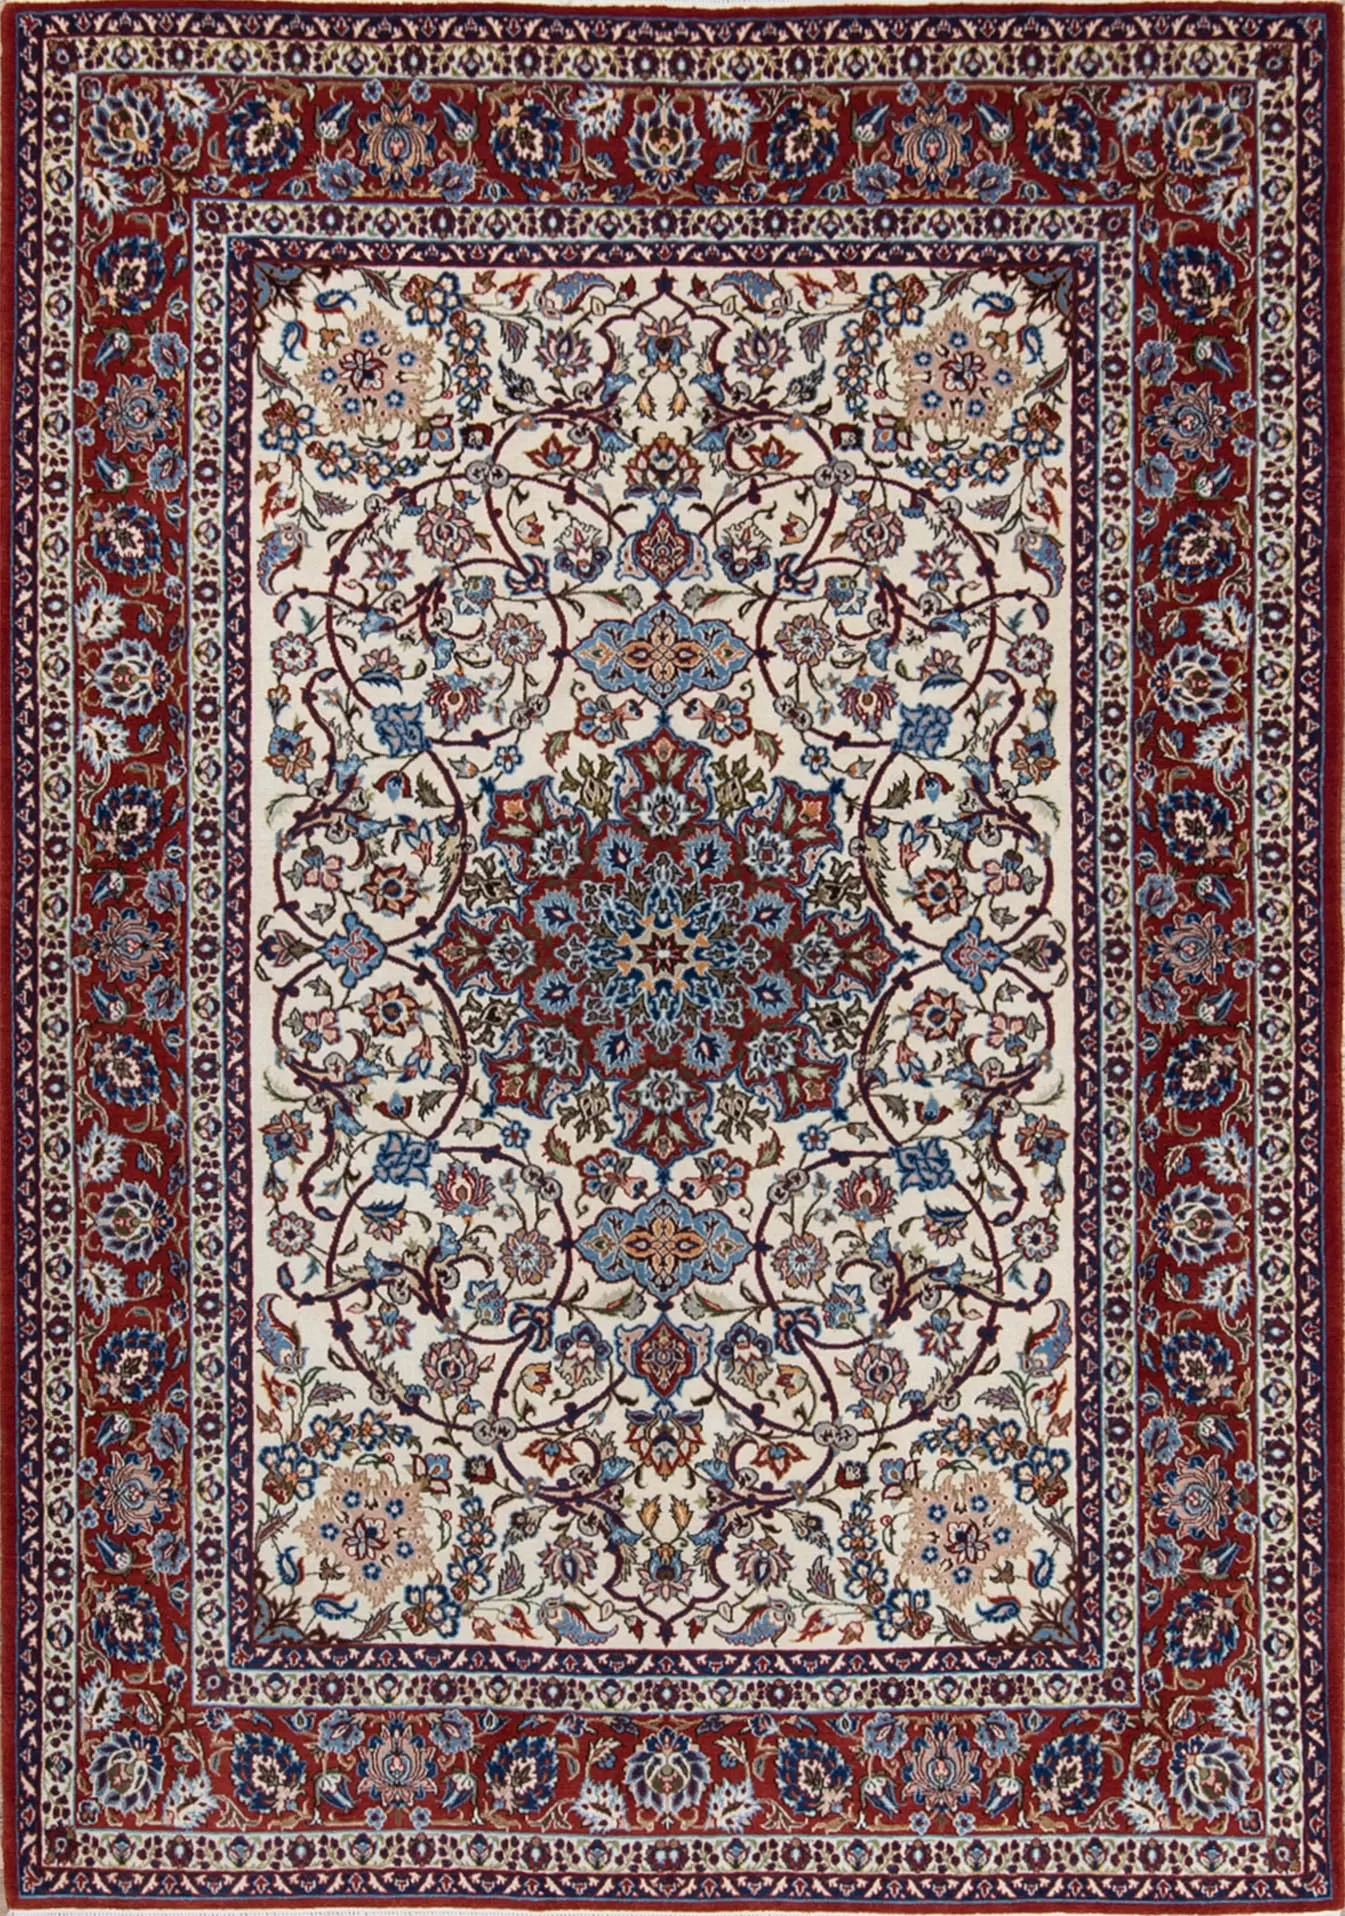 Authentic handmade antique Persian Isfahan Wool rug with beige and red colors. Rug size 5x7.